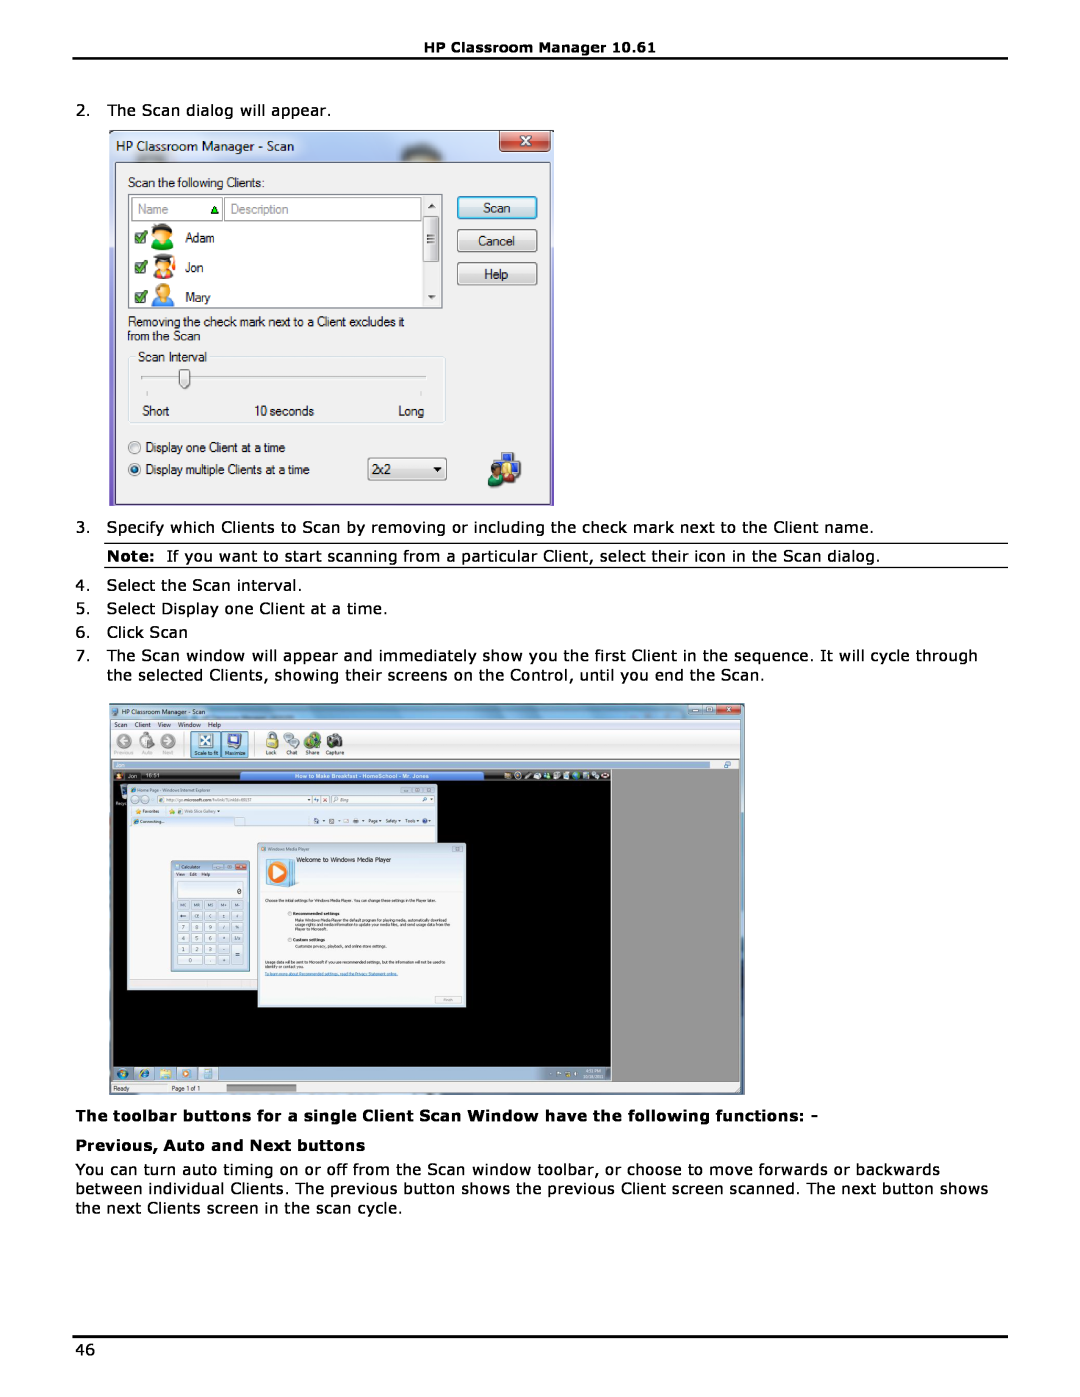 HP Classroom Manager manual The Scan dialog will appear 